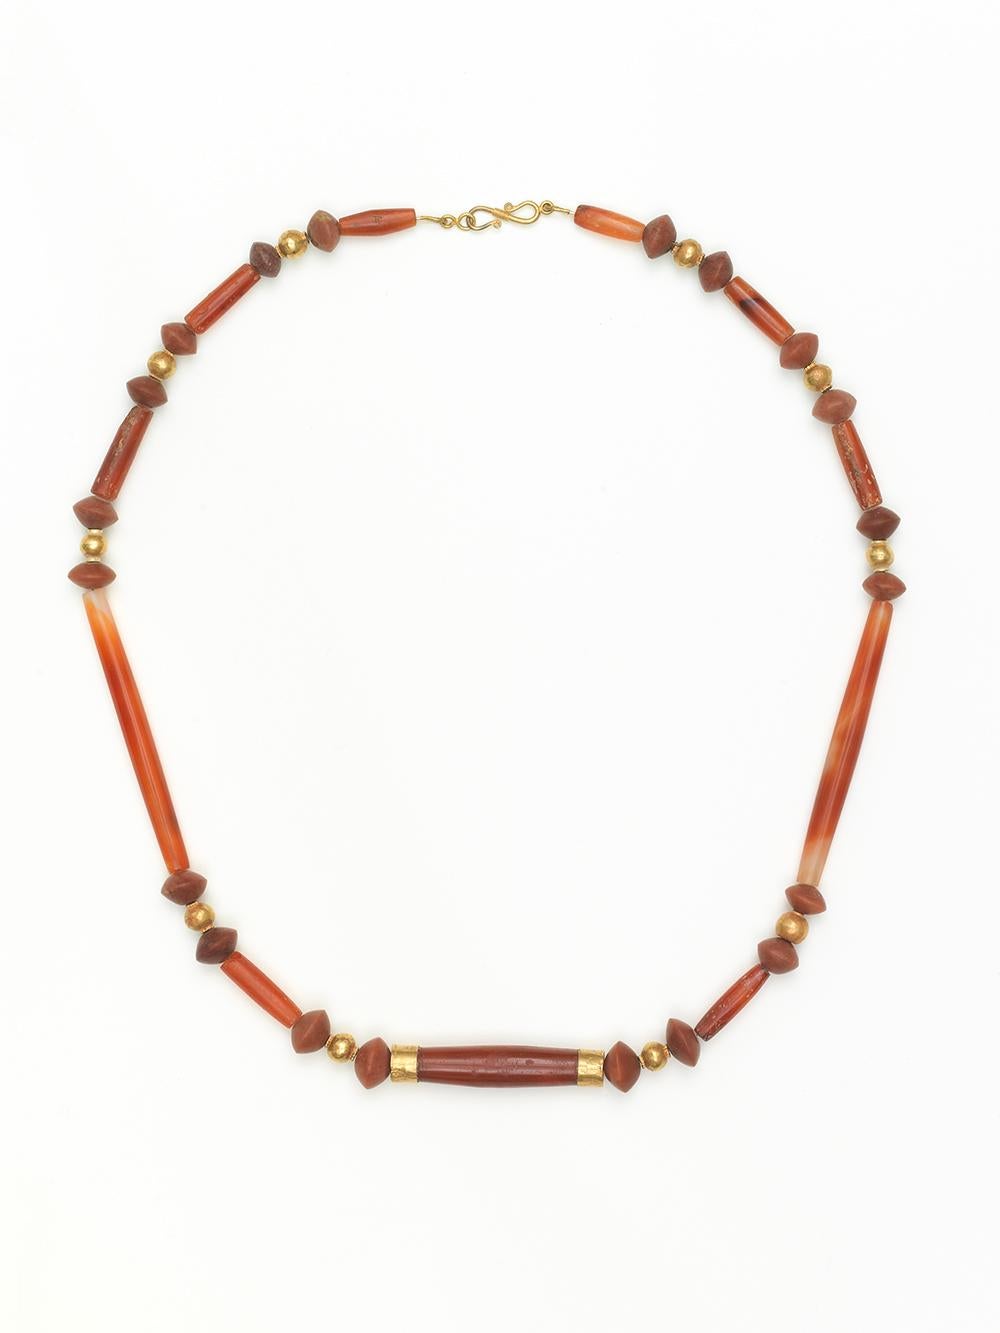 This striking necklace is made of expertly carved tubular carnelian and red agate stone. Most likely from the Hellenist period or just after, jewellery at this time was worn by both men and women. 

Much of the jewellery in Ancient Greece, the